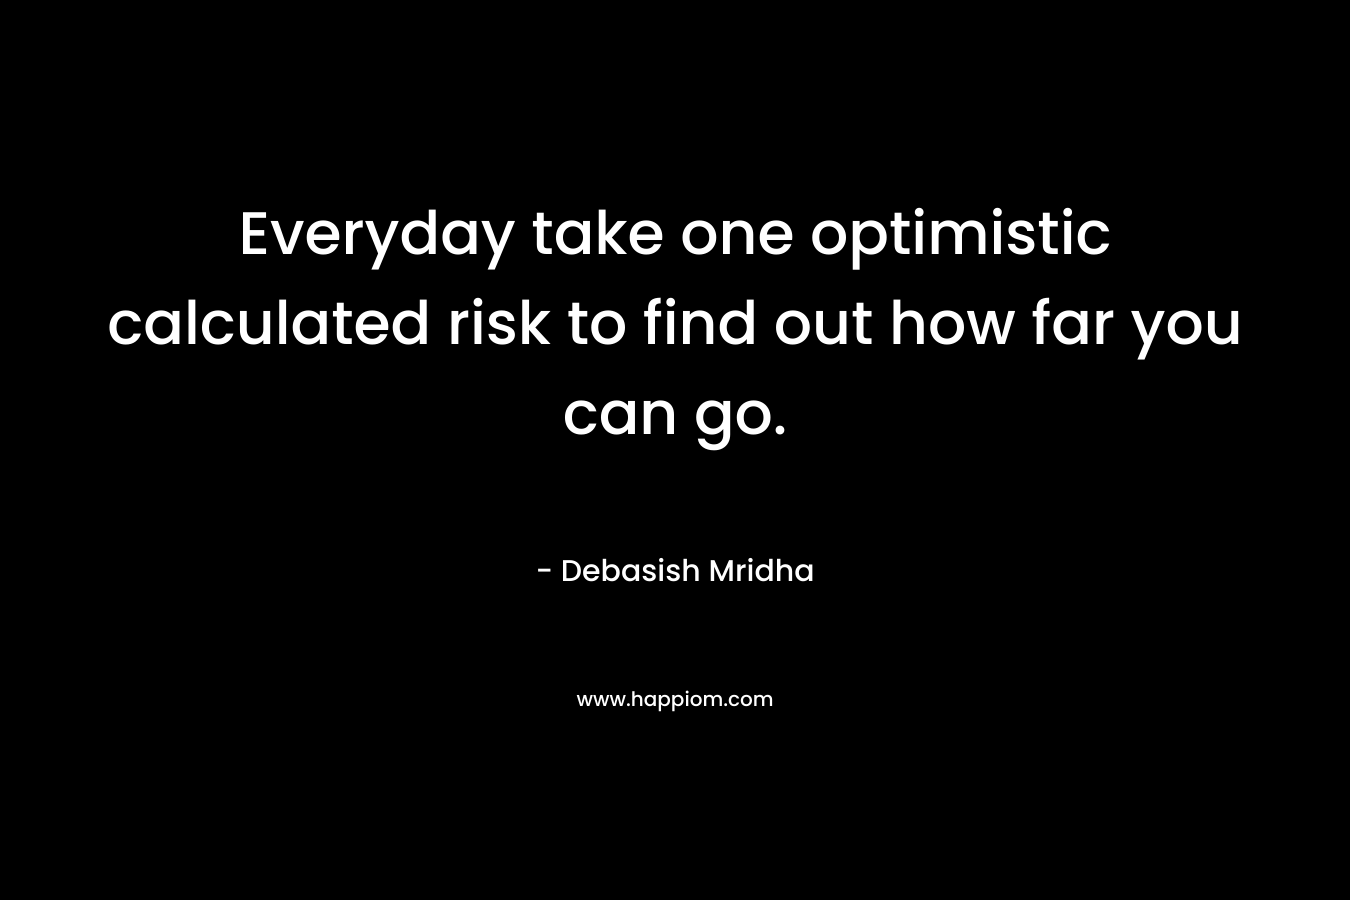 Everyday take one optimistic calculated risk to find out how far you can go. – Debasish Mridha